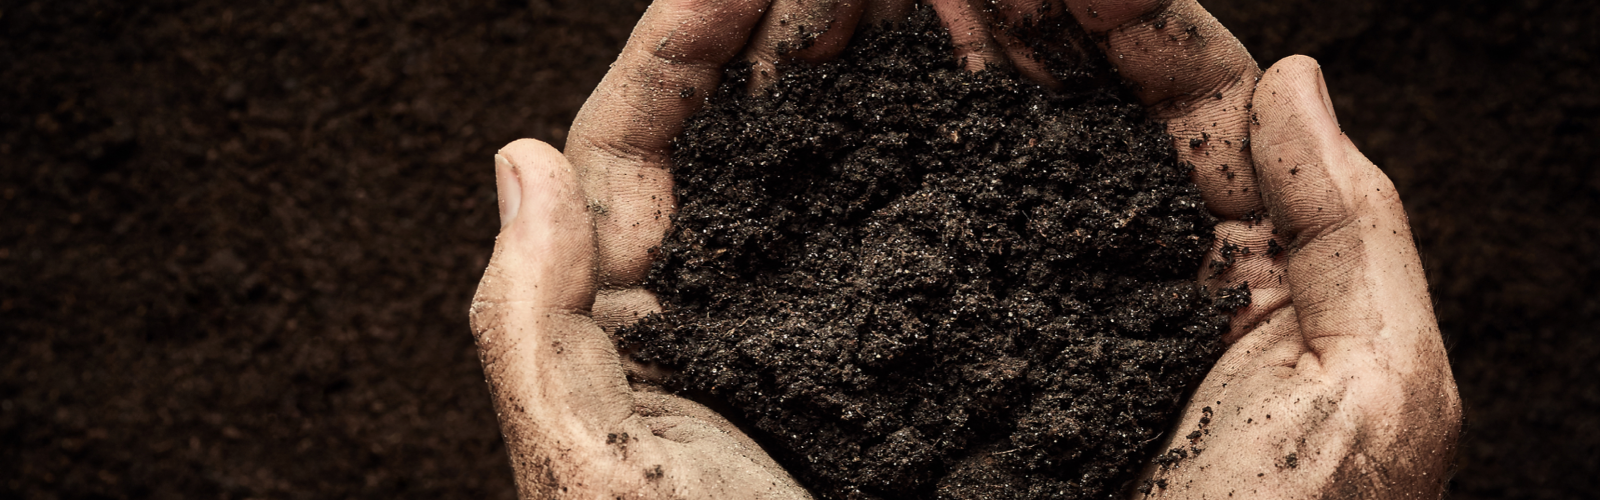 What Is Super Soil? | Composition And Benefits